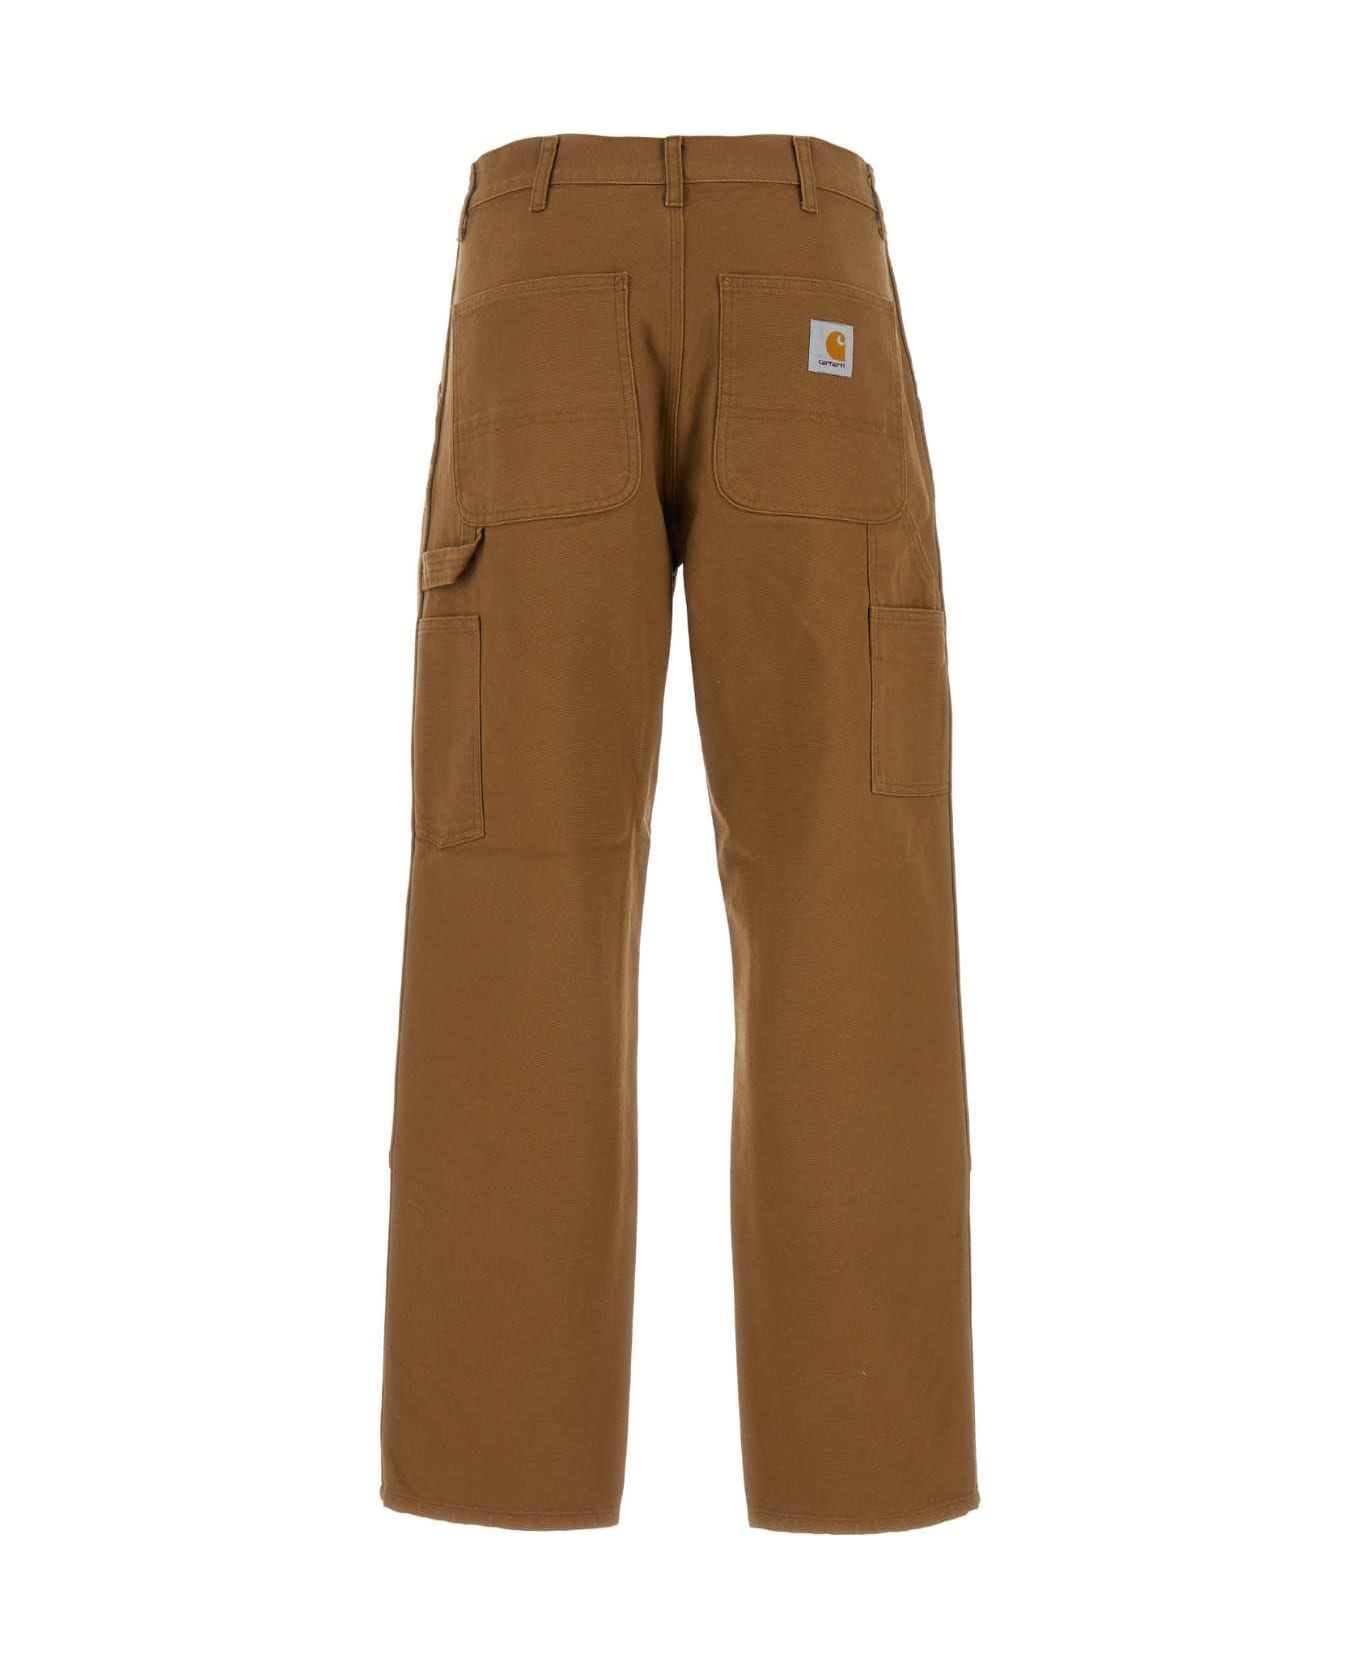 Carhartt Biscuit Cotton Double Knee Pant - BLACK ボトムス